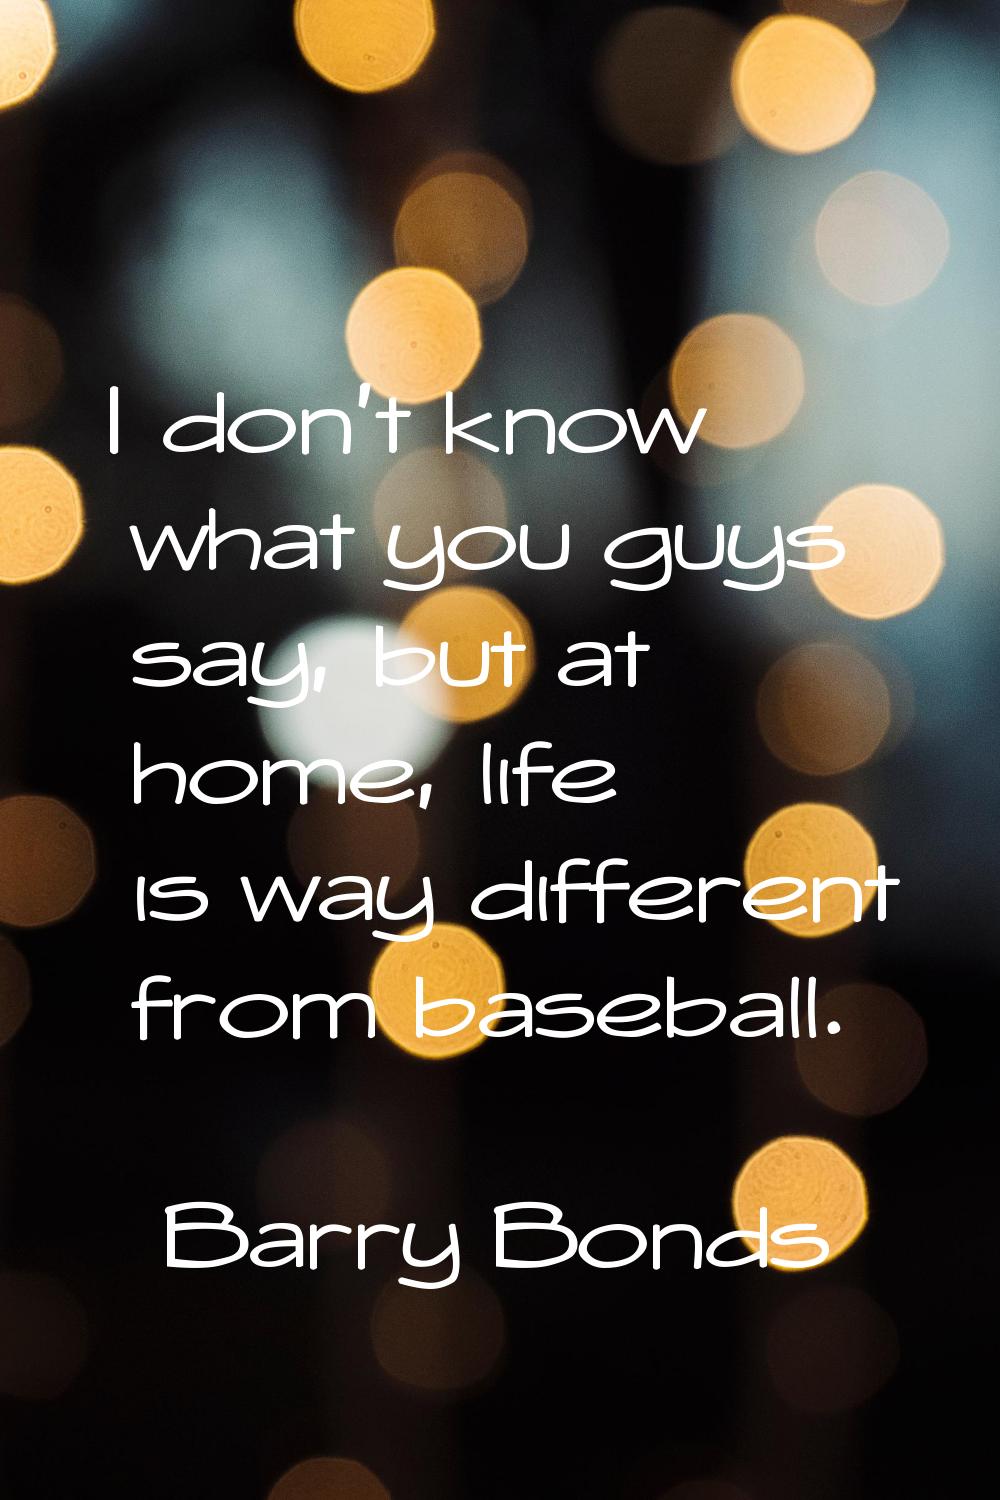 I don't know what you guys say, but at home, life is way different from baseball.